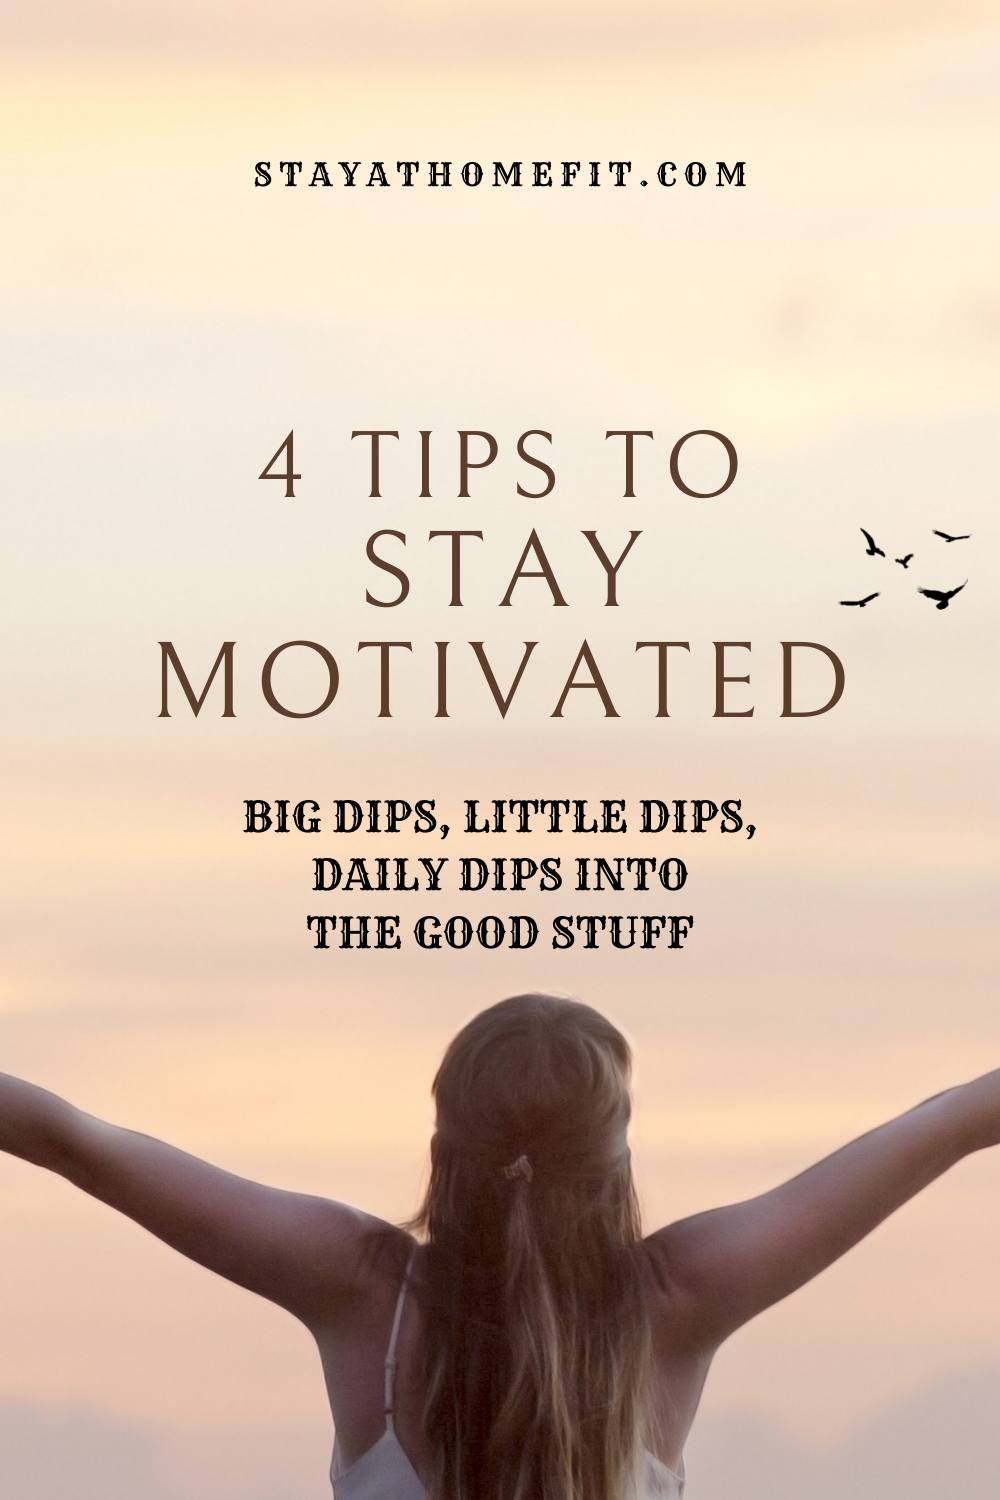 4 Tips to Stay Motivated